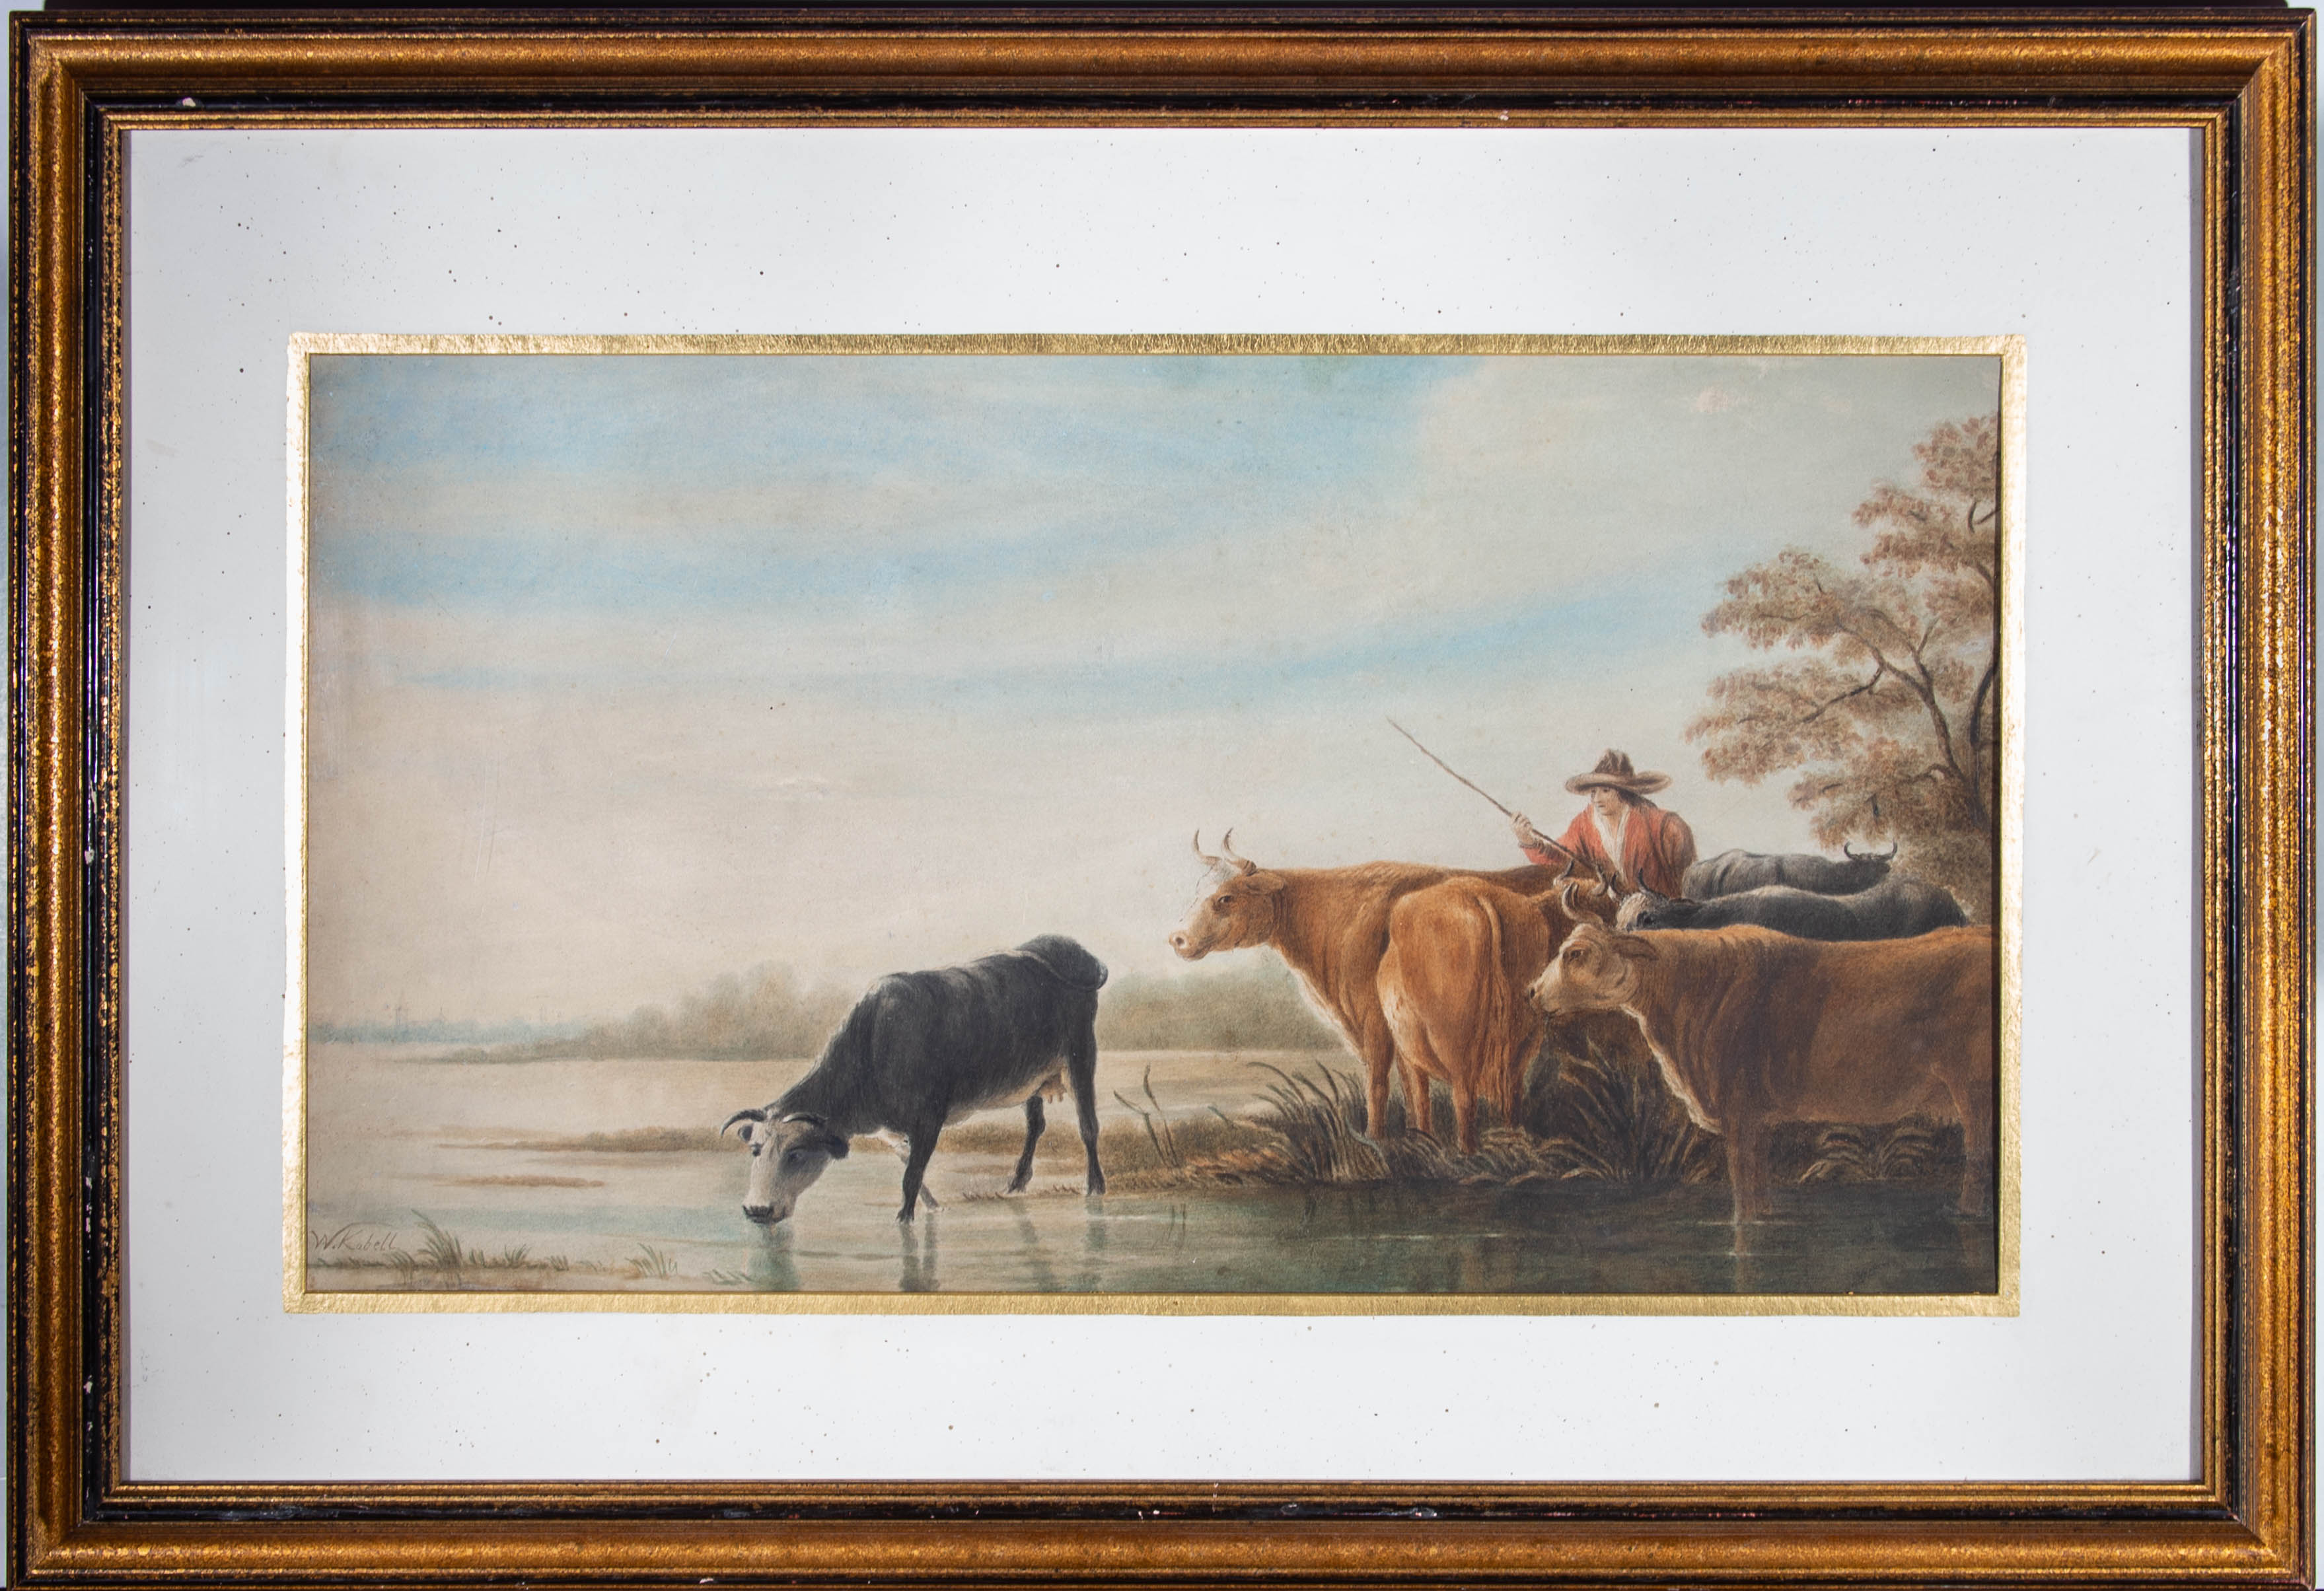 Beautiful and scenic watercolour of a farmer tending to his cattle. The figures and cows are highly detailed. The painting is framed in an ornate gilt and black frame with a speckled white mount with a gold inner window border. the painting is